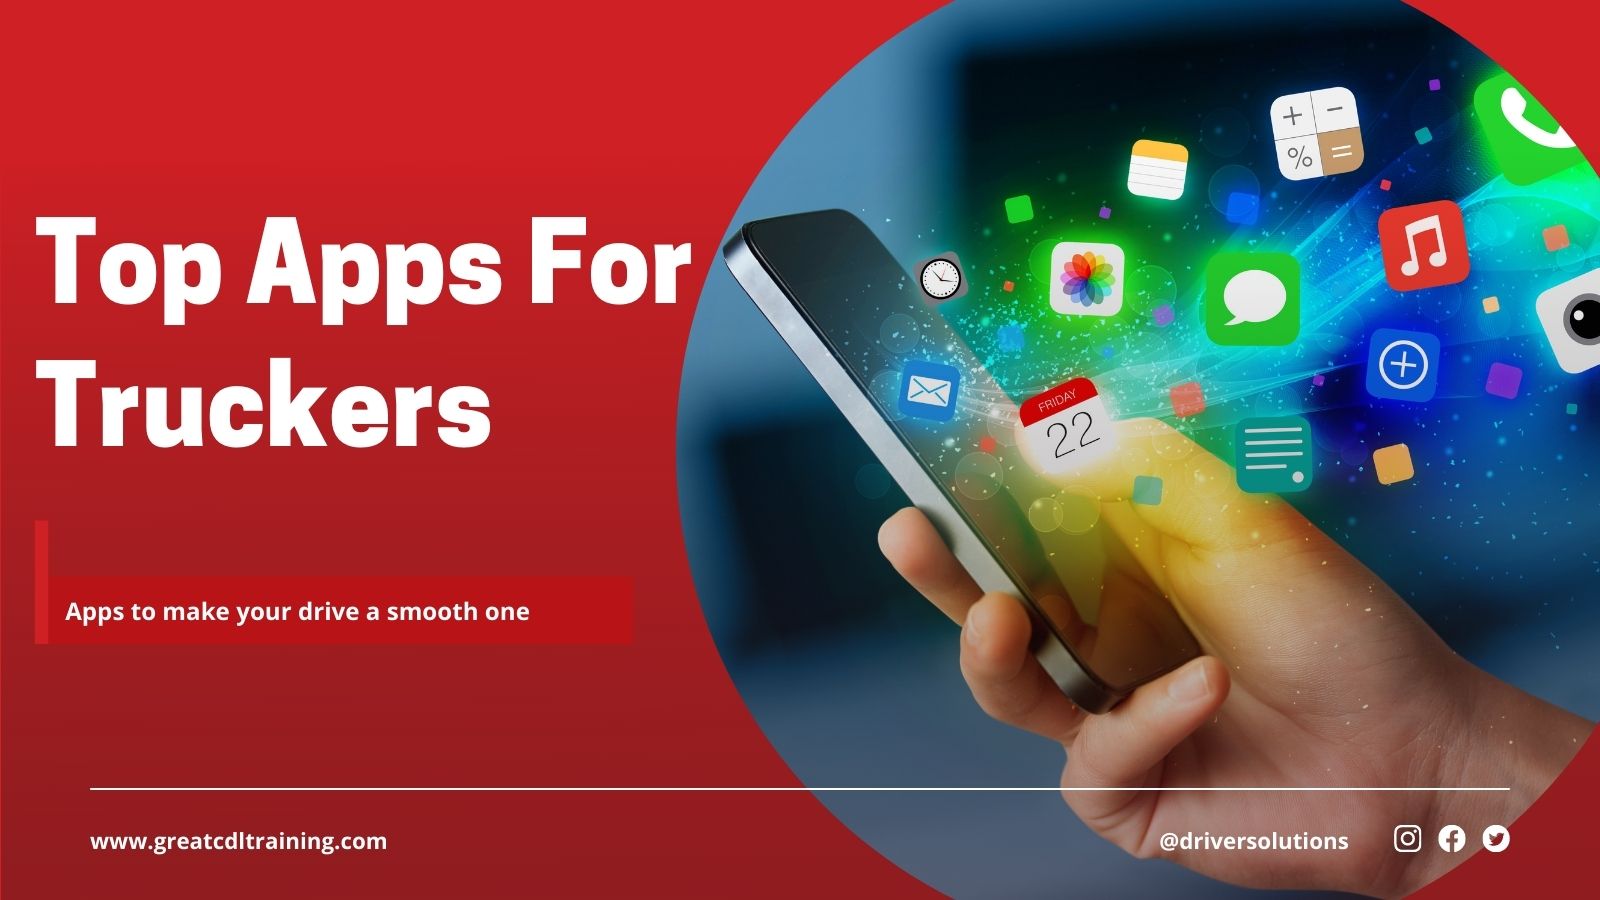 5 Top Apps for Truckers